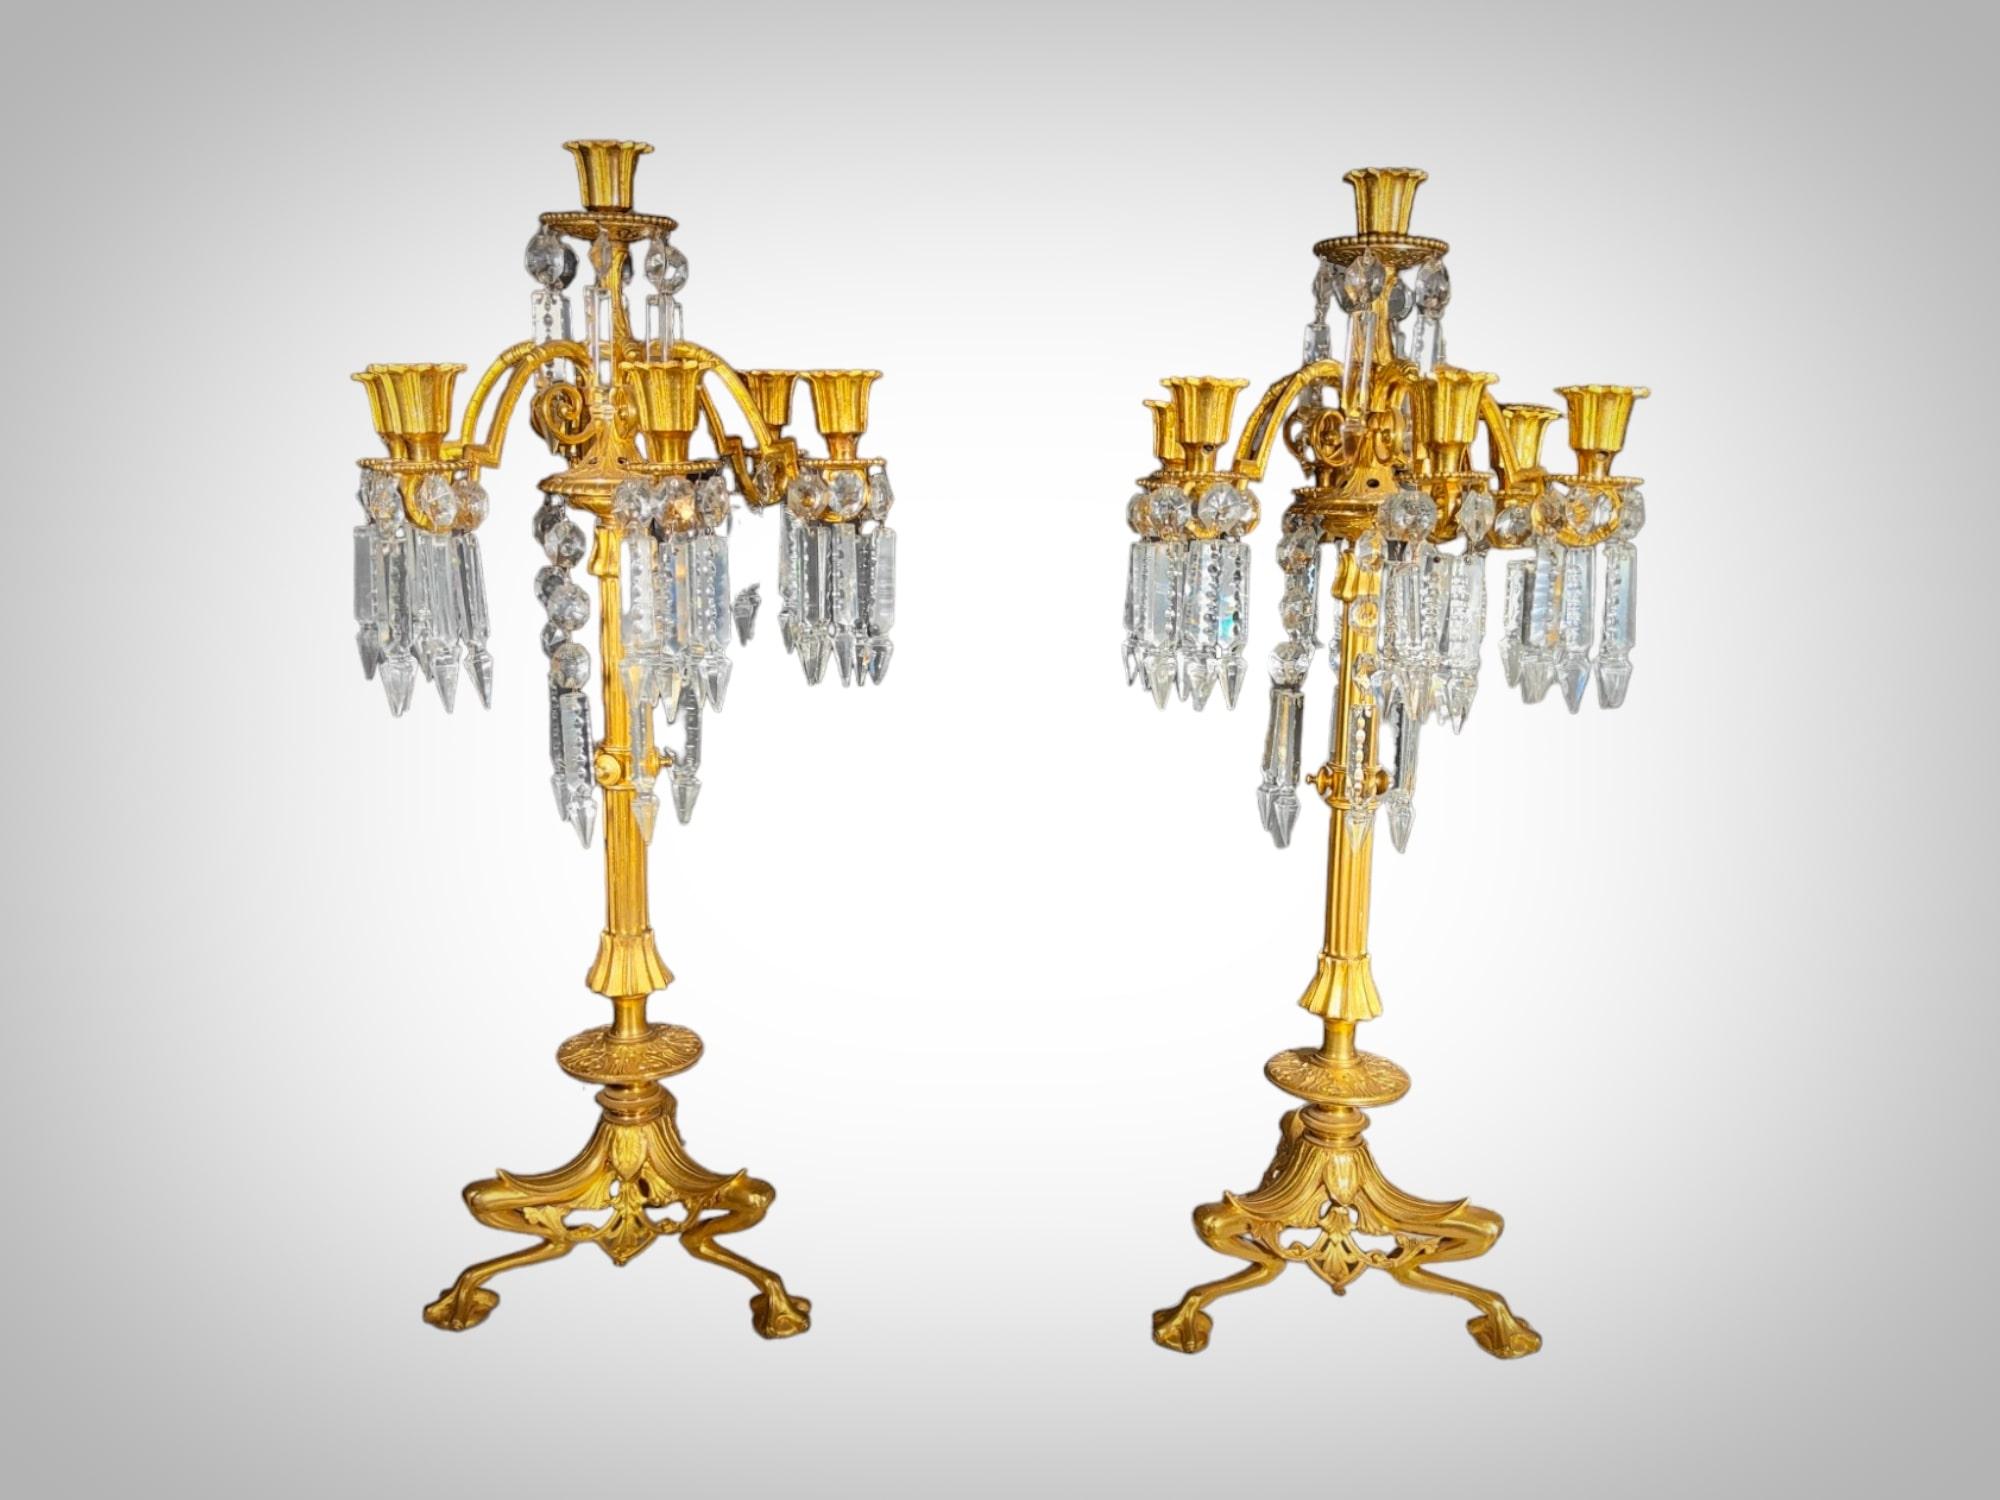 19th Century Bronze and Crystal Candelabra: Gilded Elegance and Wheel-Cut Crysta For Sale 5